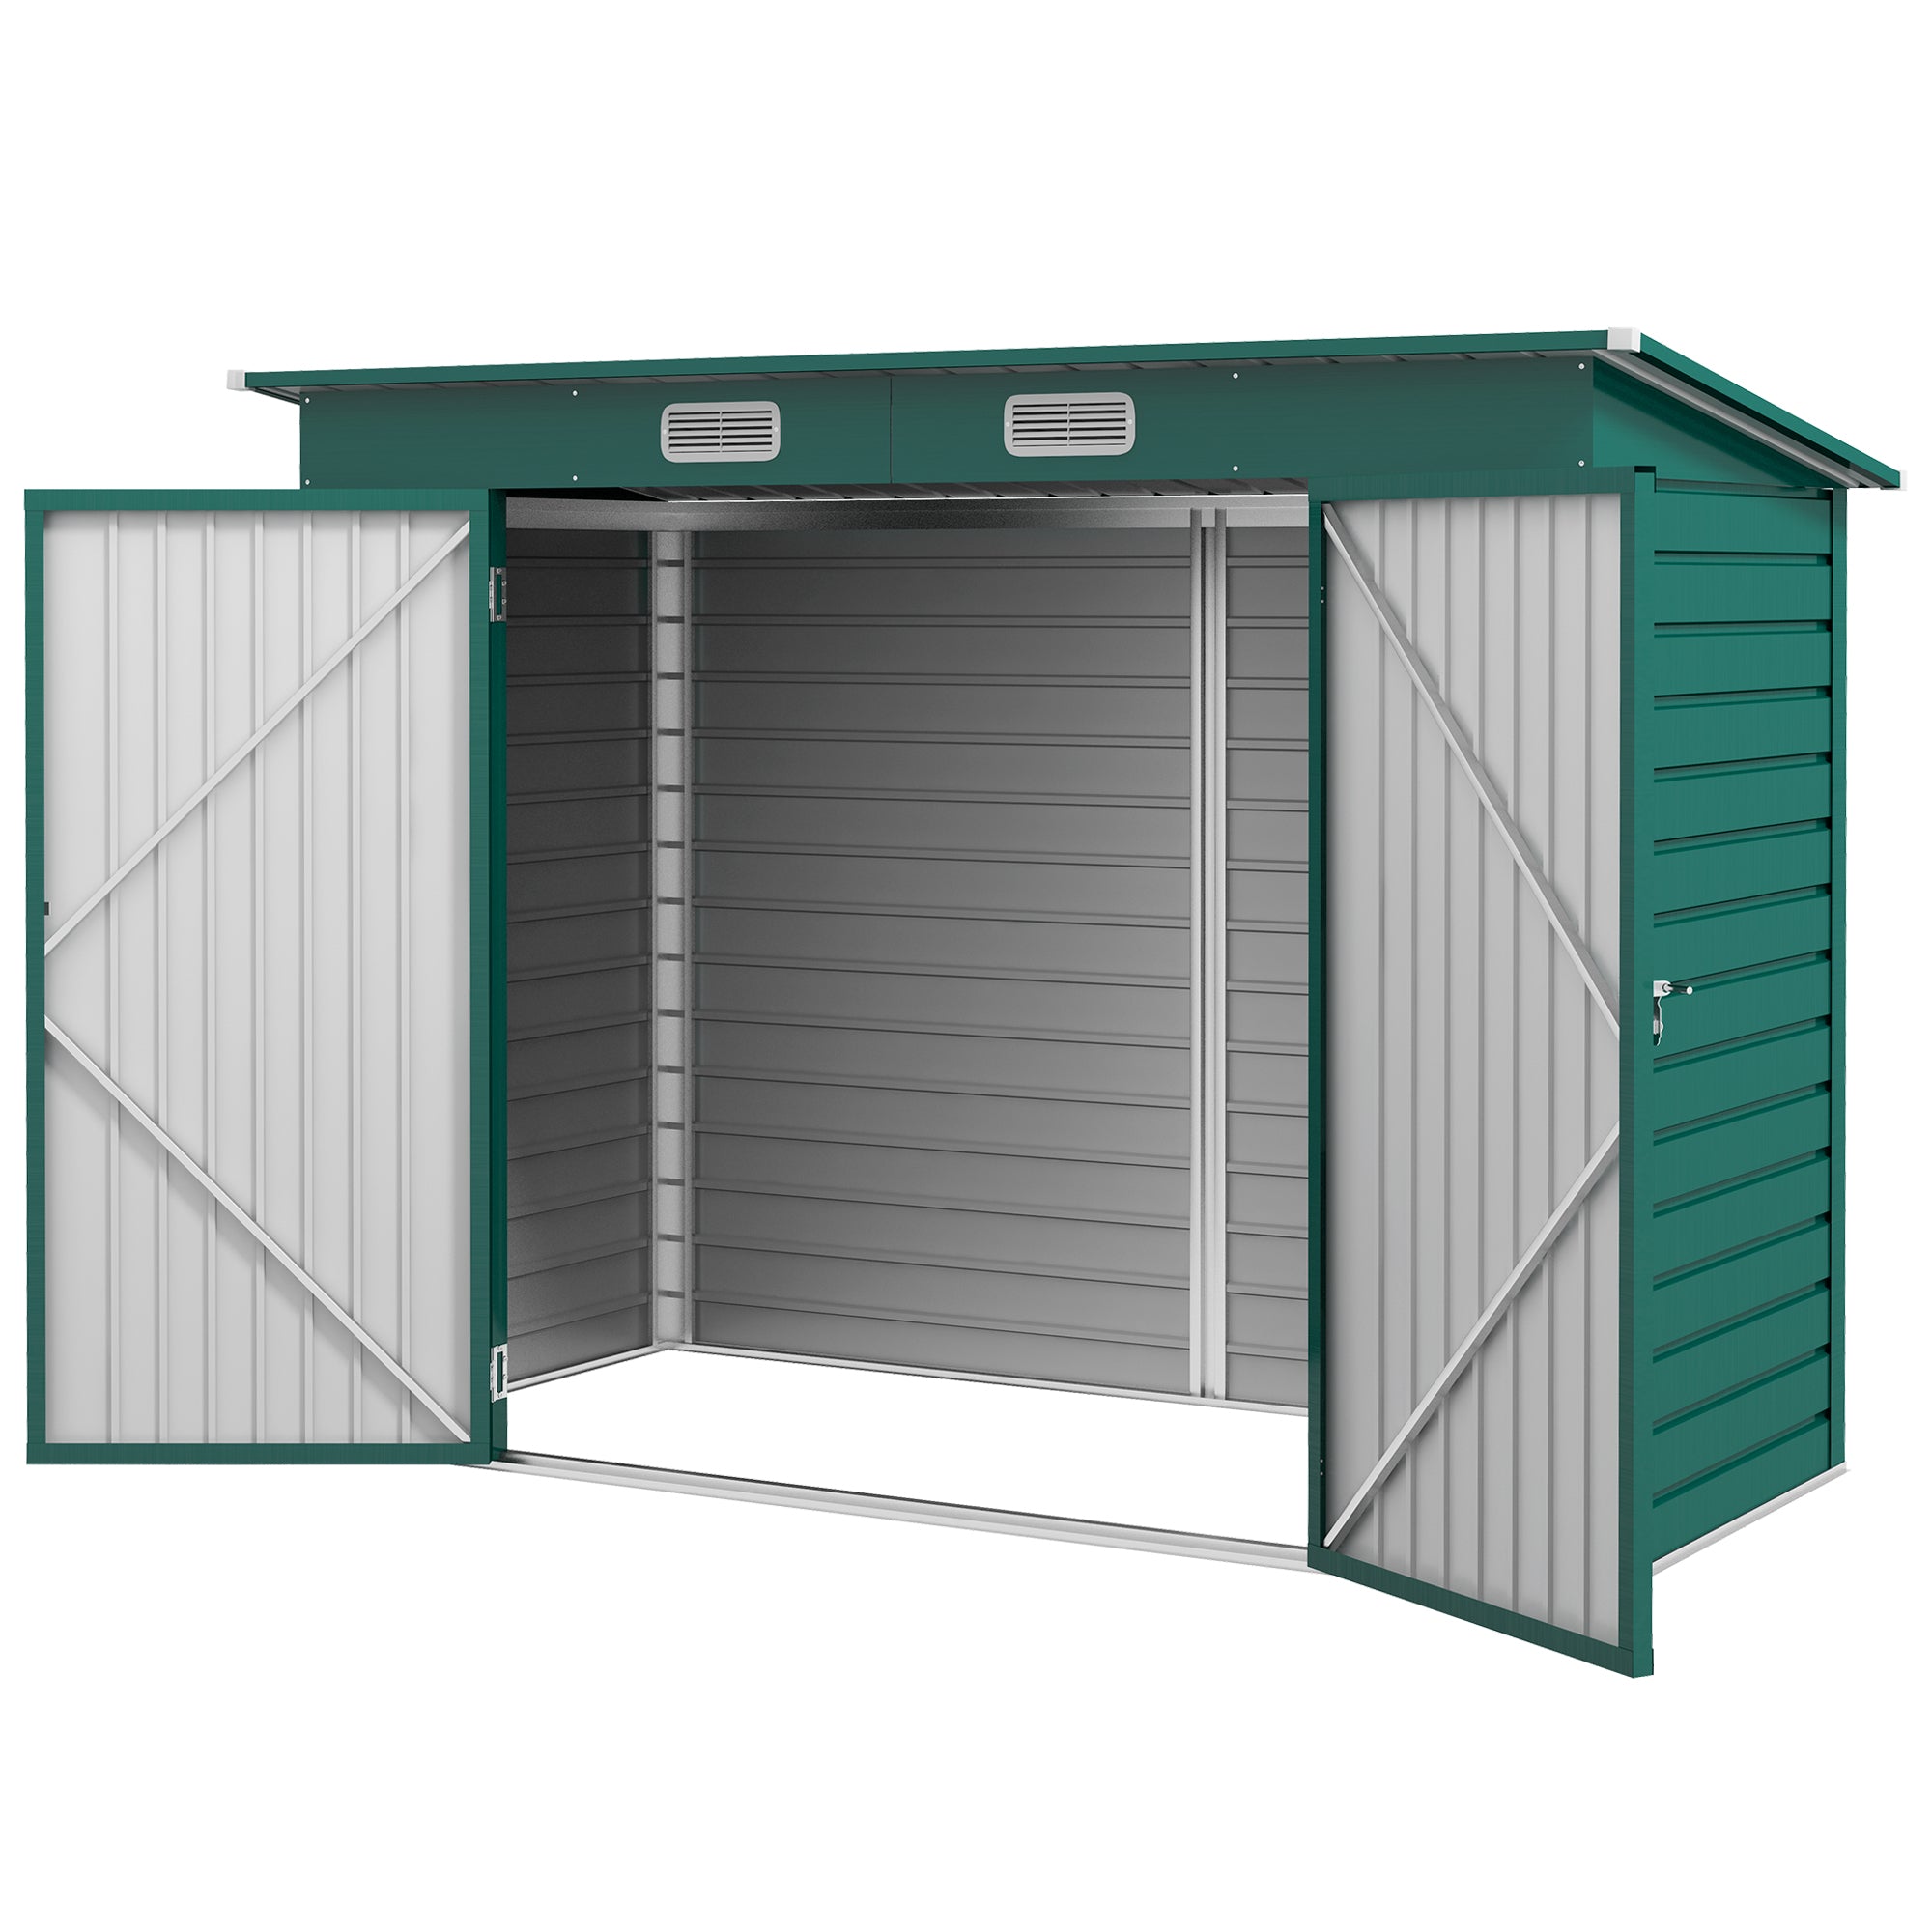 8 x 4FT Galvanised Garden Storage Shed, Metal Outdoor Shed with Double Doors and 2 Vents, Green-0